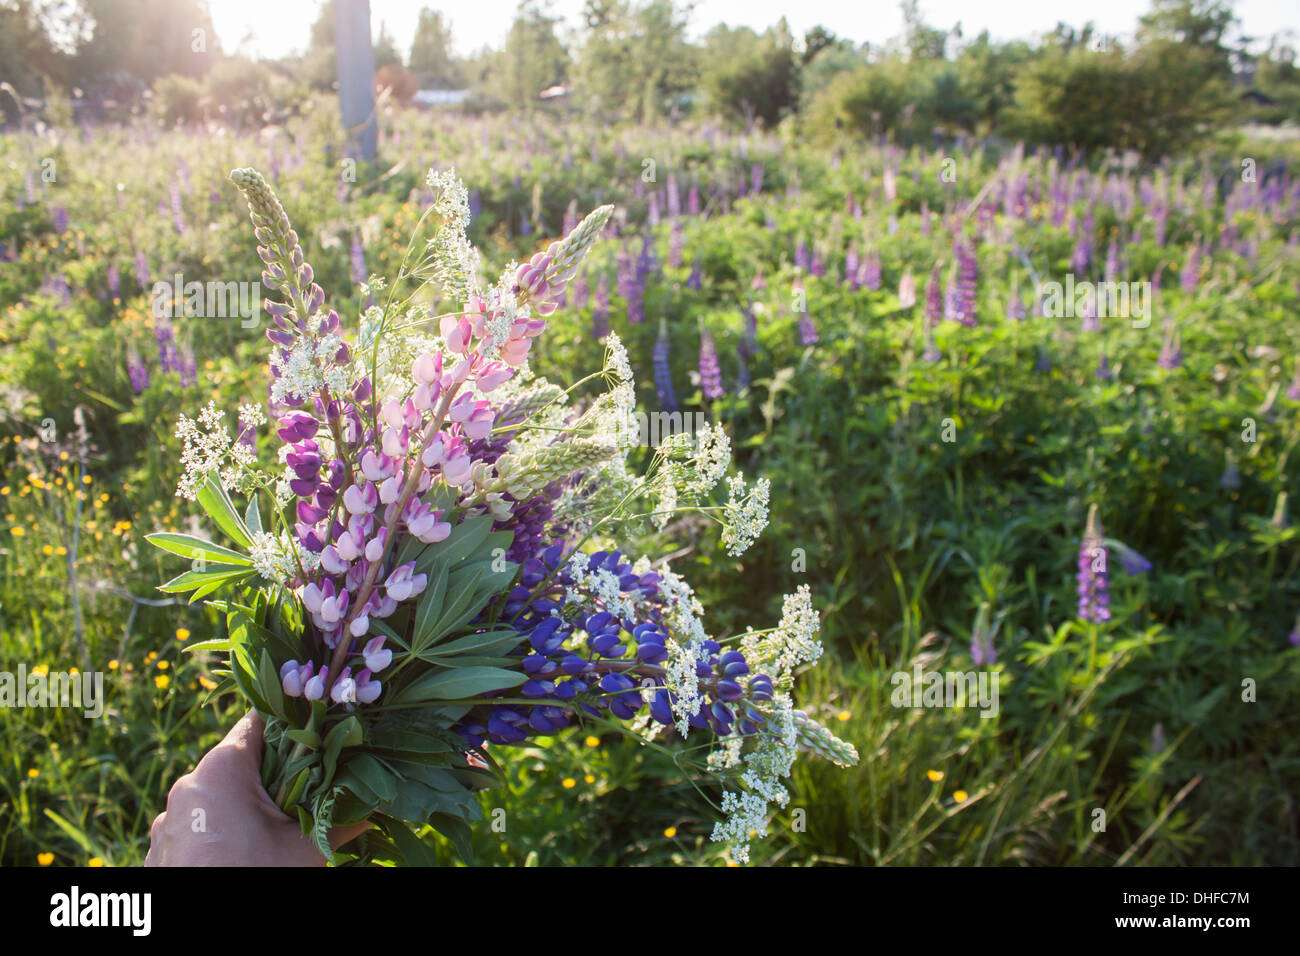 Wildflowers bouquet, flowers,  village, countryside, Stock Photo